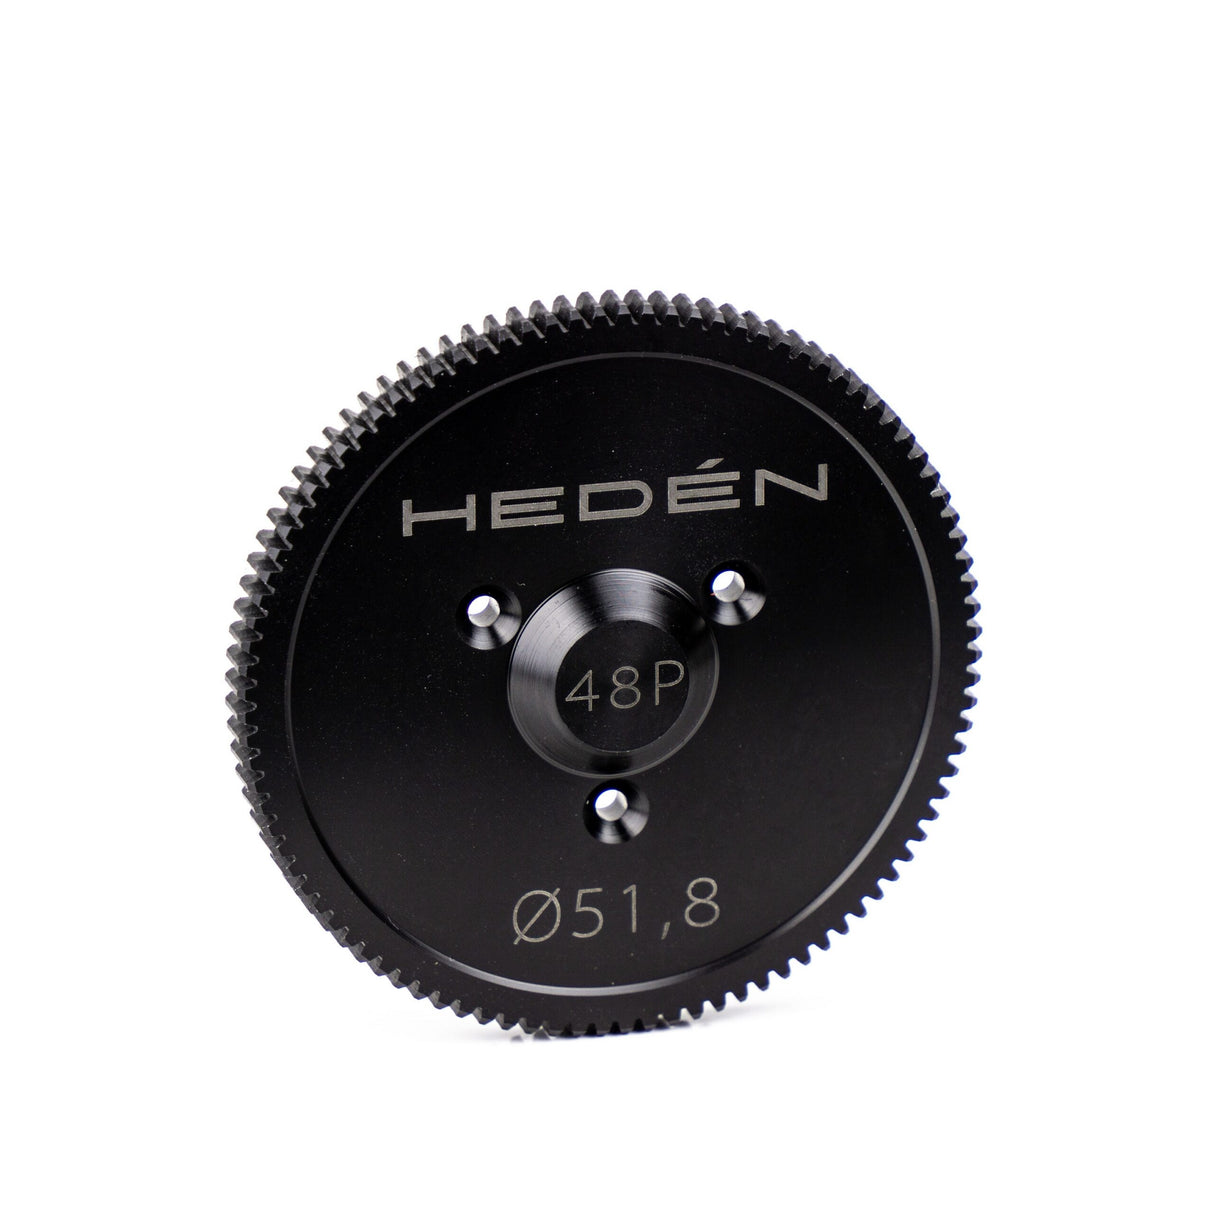 Heden 10054 Drive Gear P48 51.8mm MkII for M26T